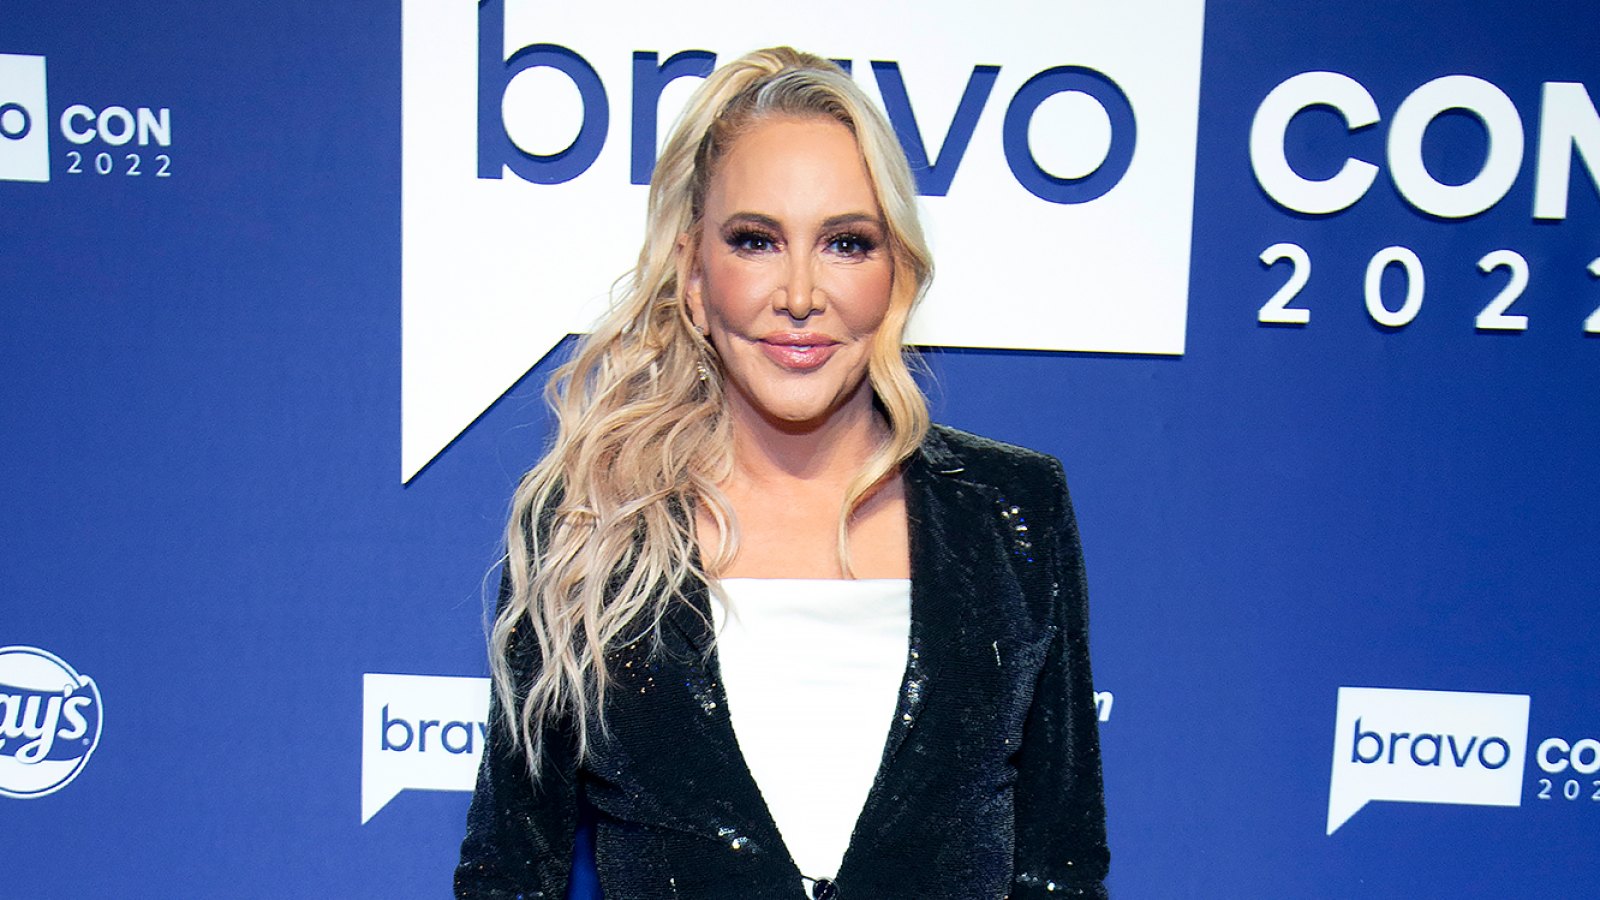 Shannon Beador Addressed Claims About Her Drinking on RHOC Reunion Days Before Arrest